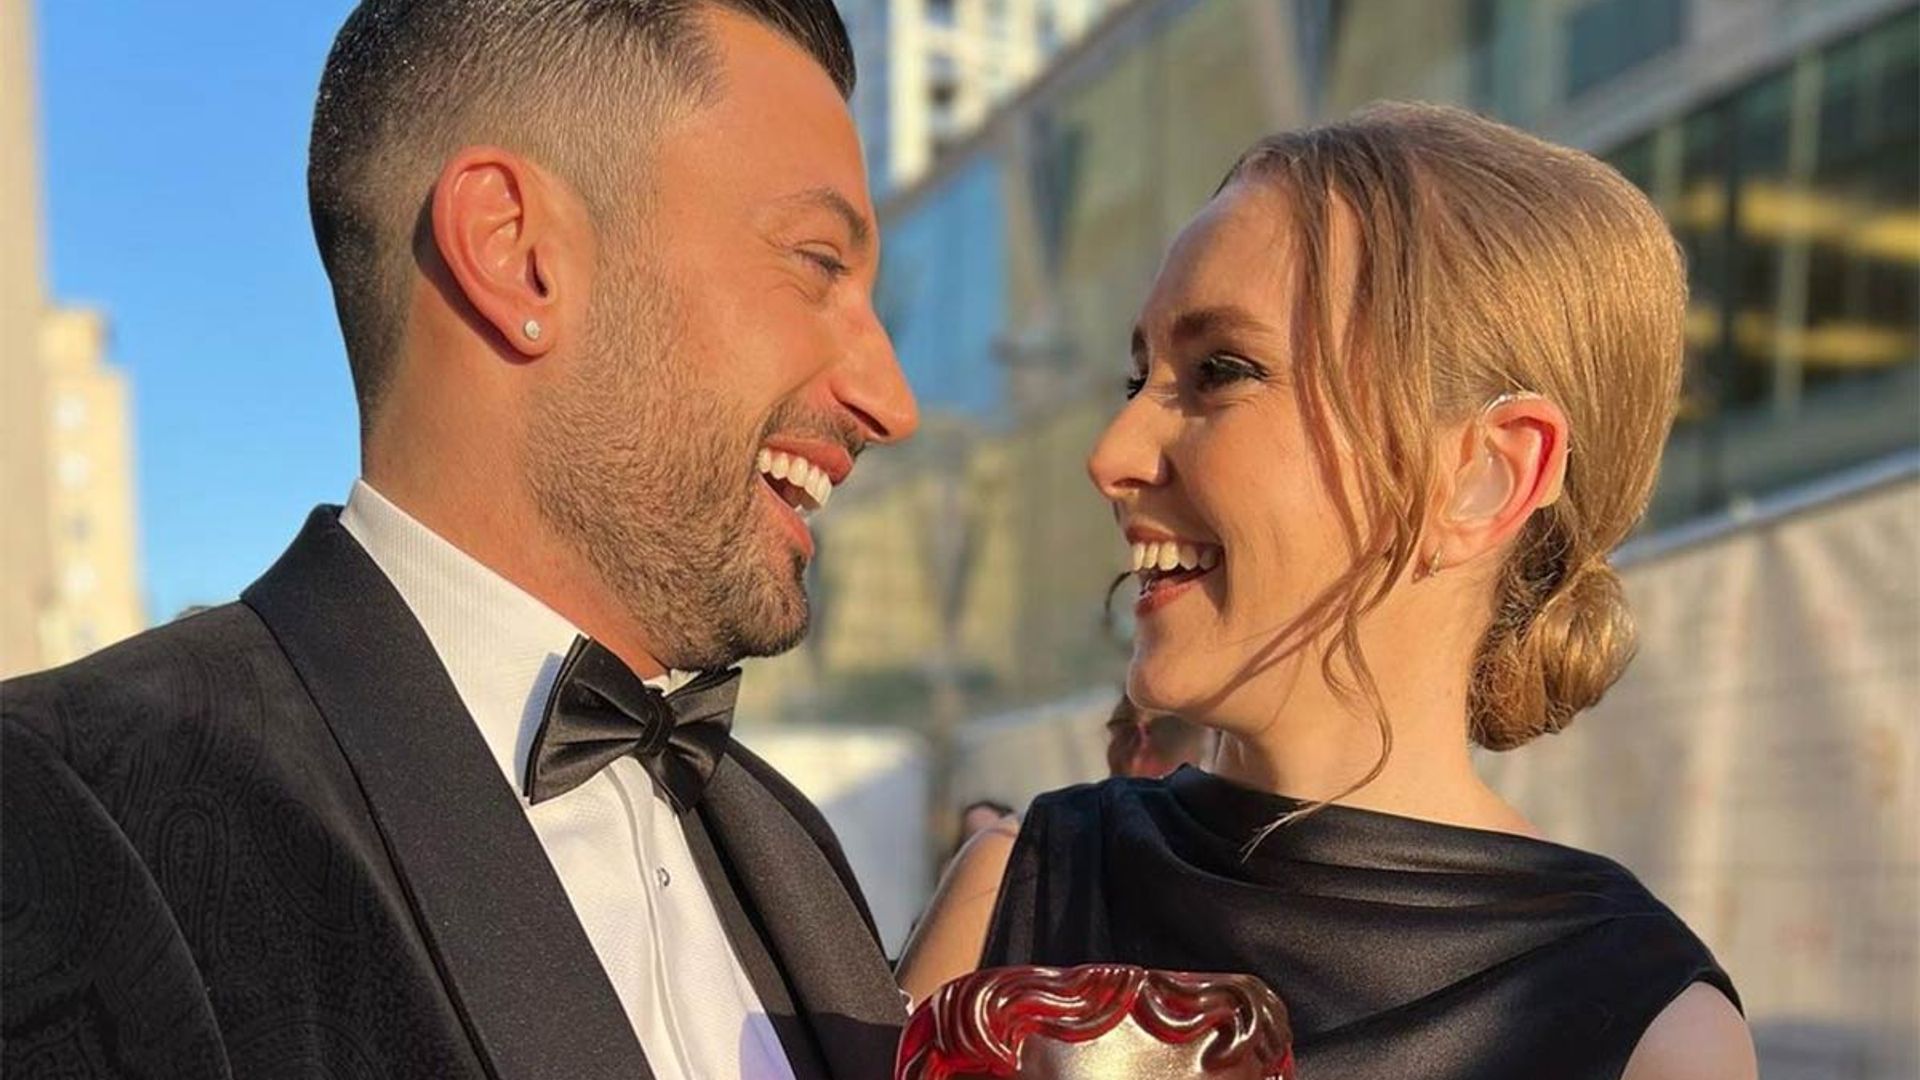 Giovanni Pernice breaks silence after big BAFTA win with Rose-Ayling Ellis